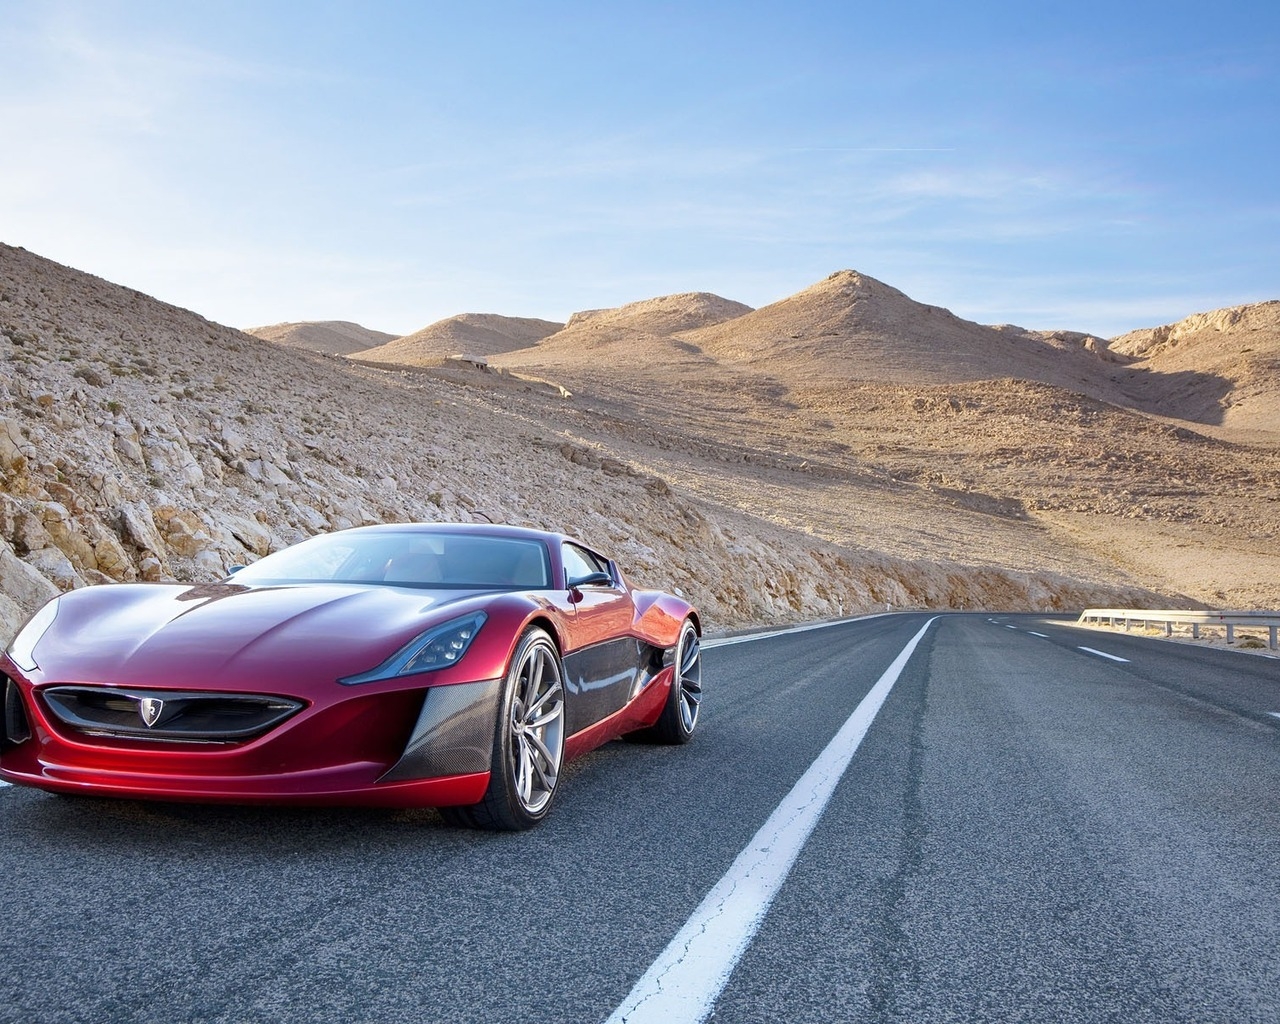 Rimac Concept One for 1280 x 1024 resolution